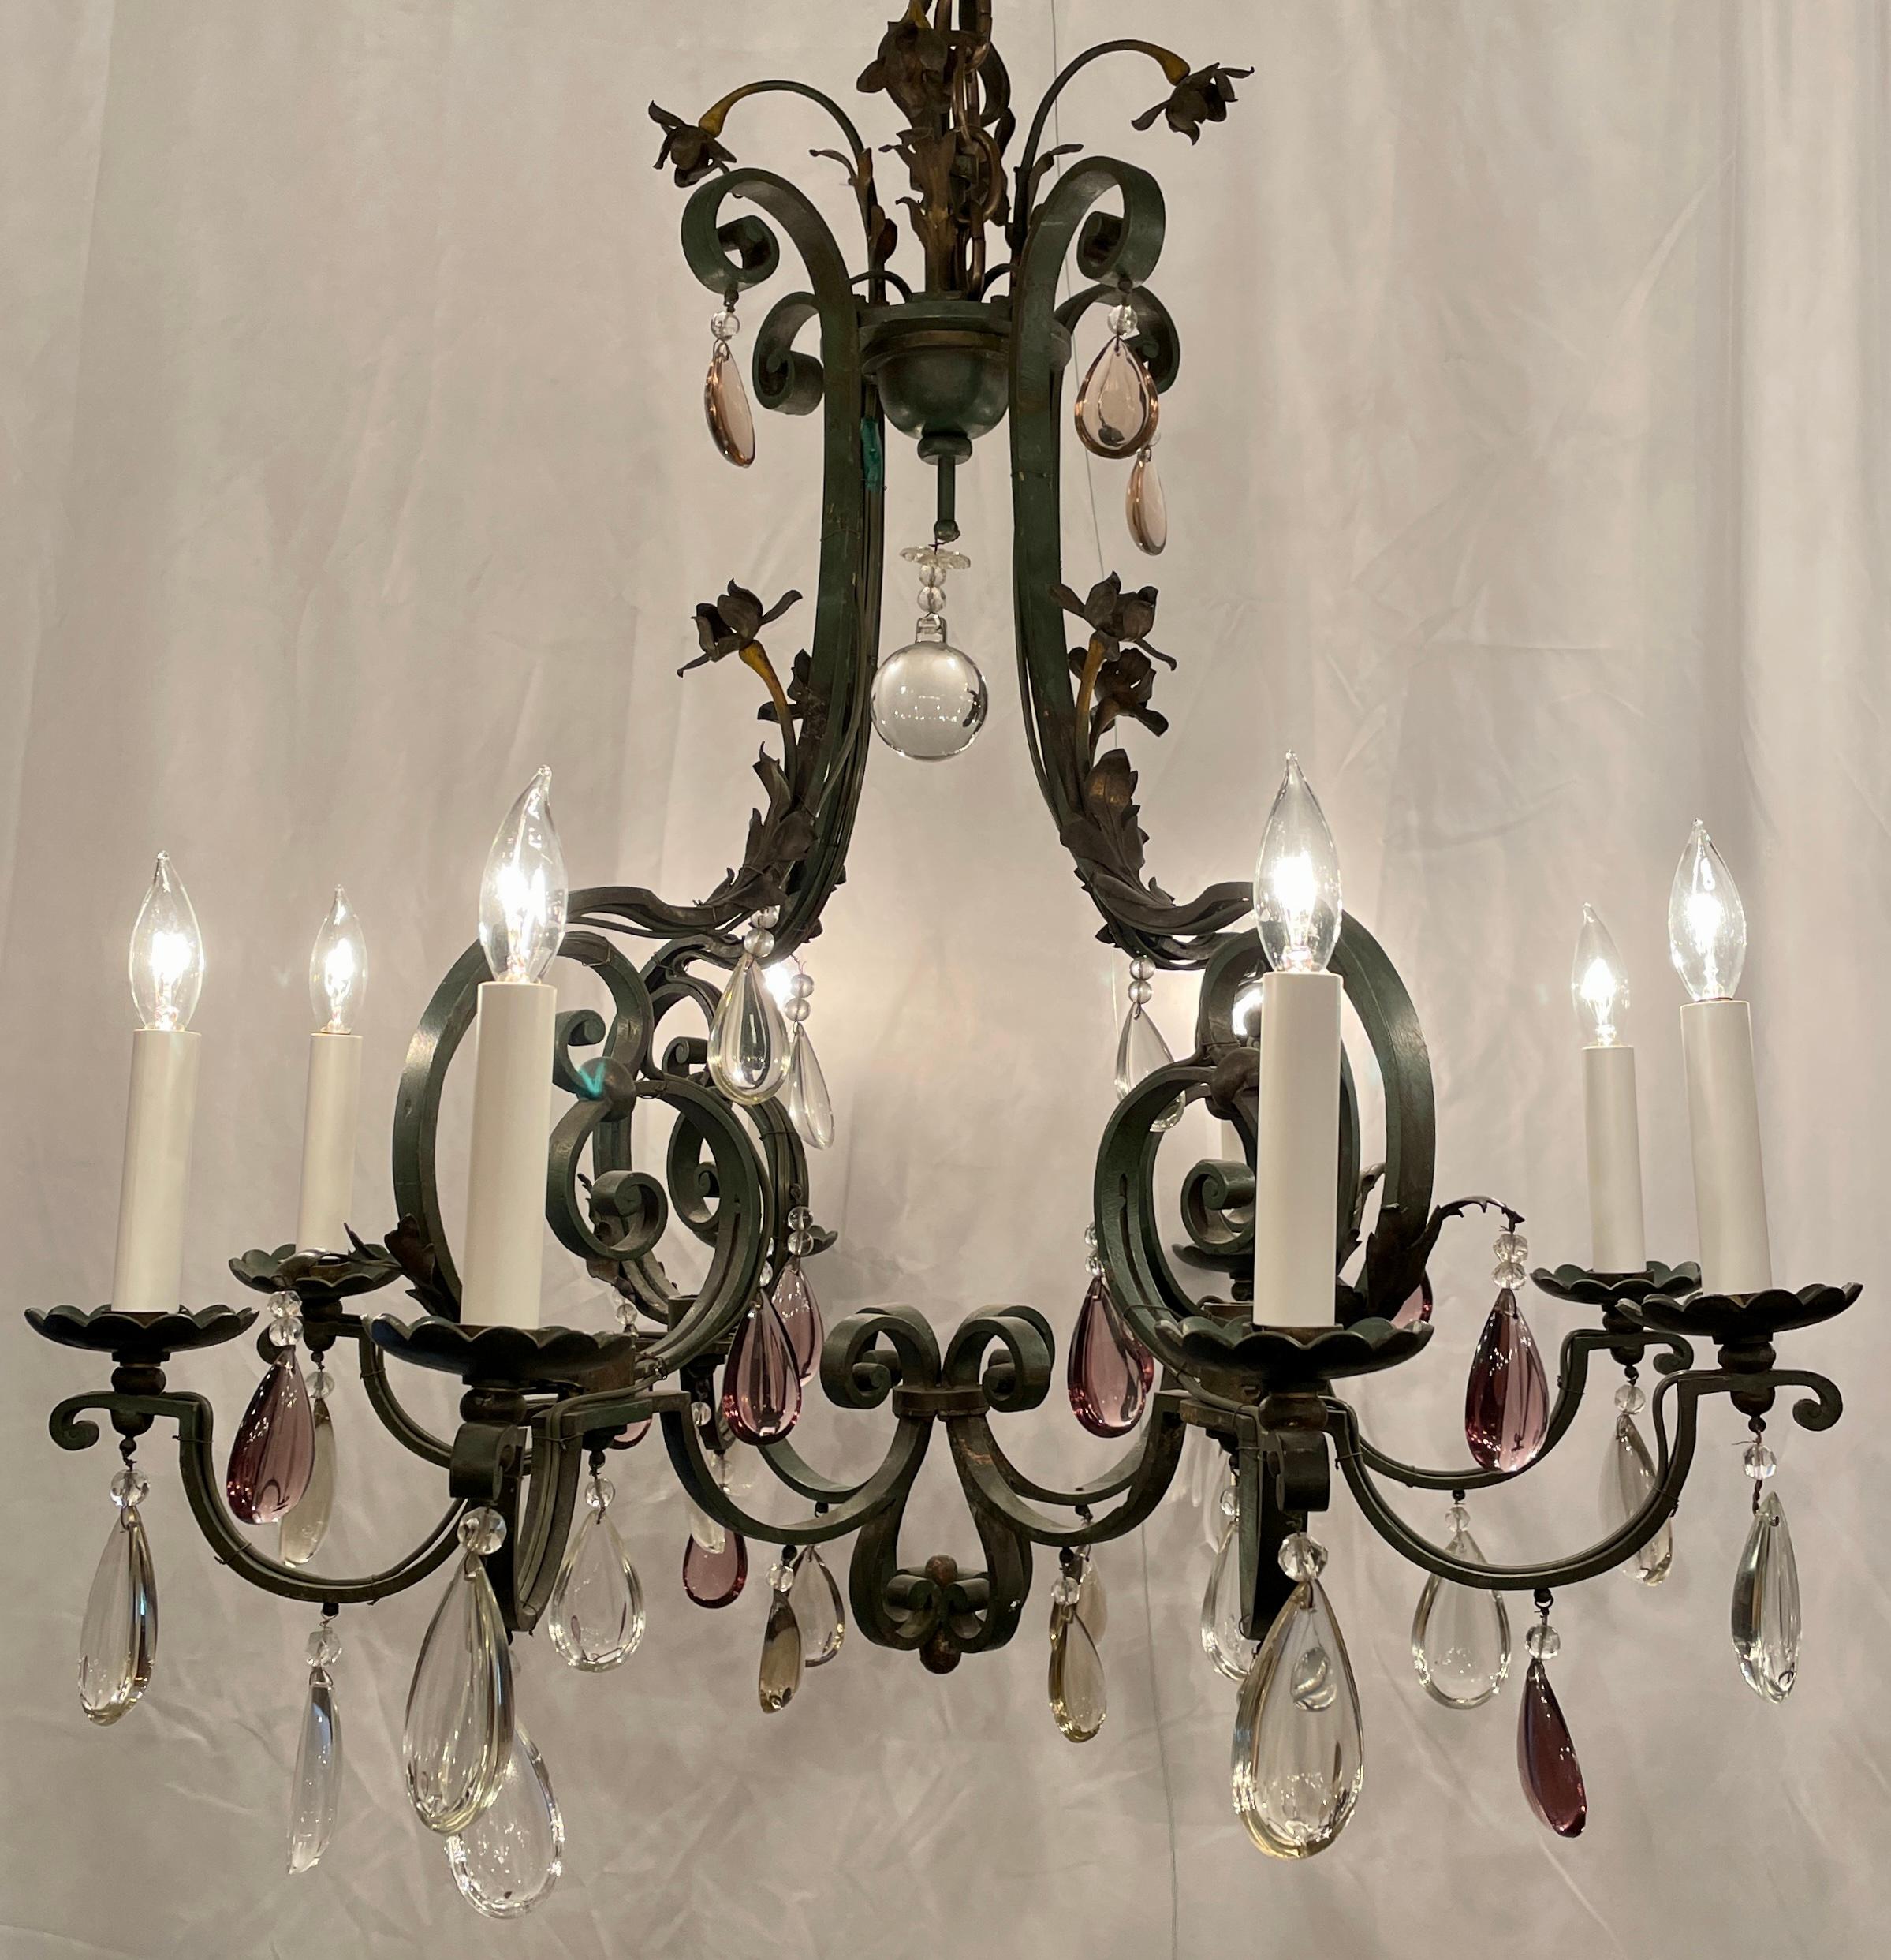 Antique French wrought iron & crystal 8 light chandelier, circa 1920.
Beautiful hand-wrought iron chandelier with both clear and purple polished prisms.